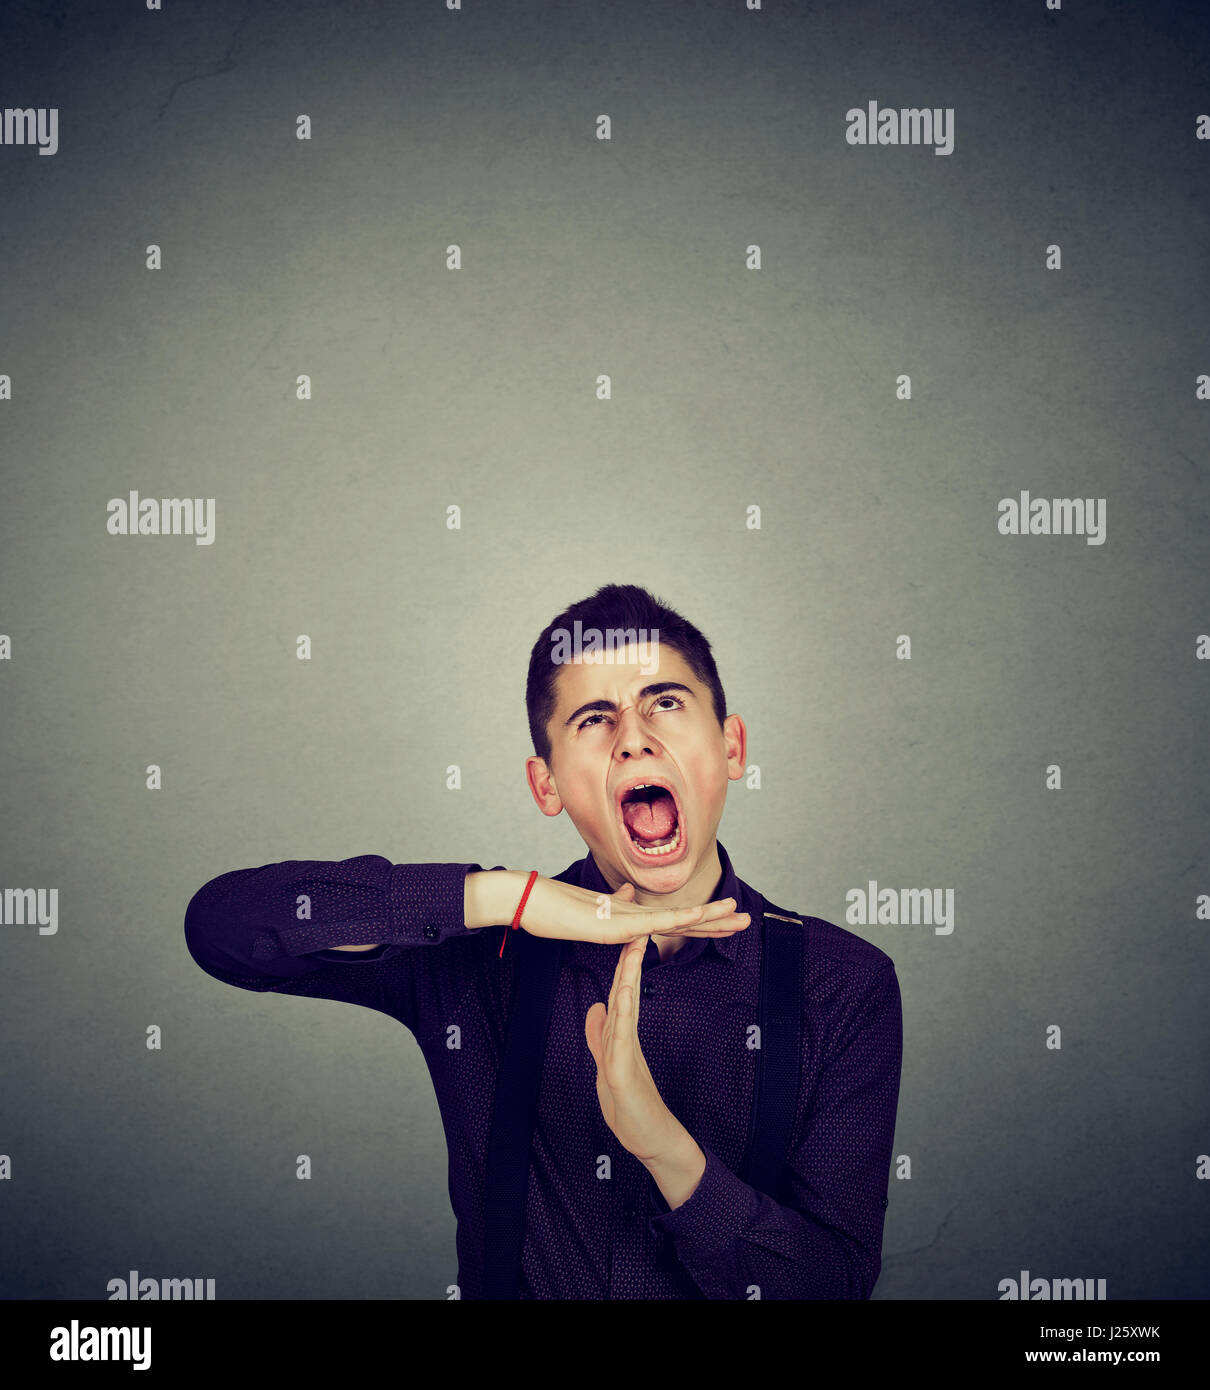 Overwhelmed man showing time out hand gesture, frustrated screaming to stop isolated on grey wall background. Too many things to do concept Stock Photo